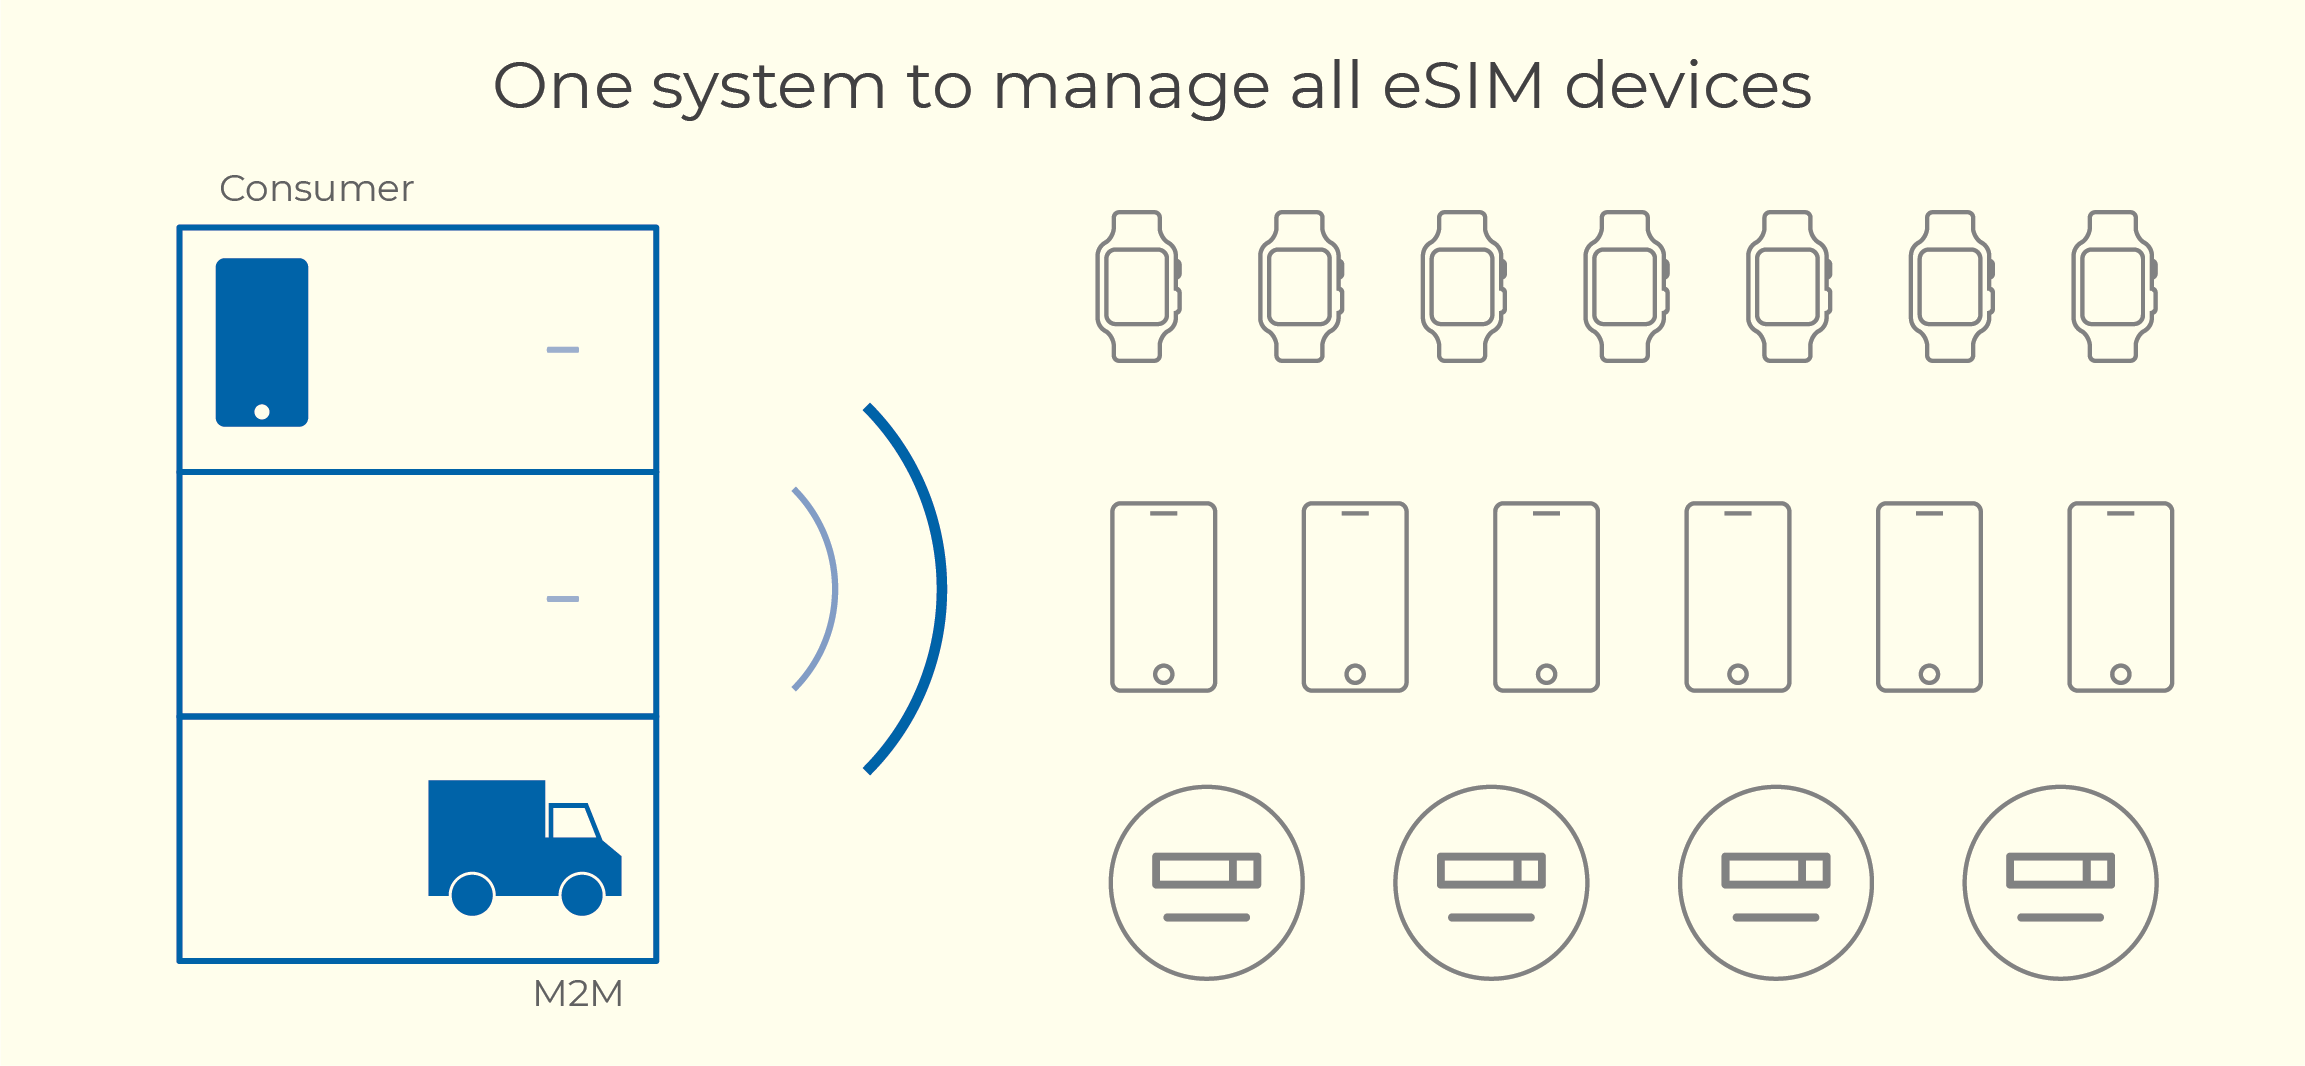 Manage consumer and M2M eSIM devices on one system | Workz Group 